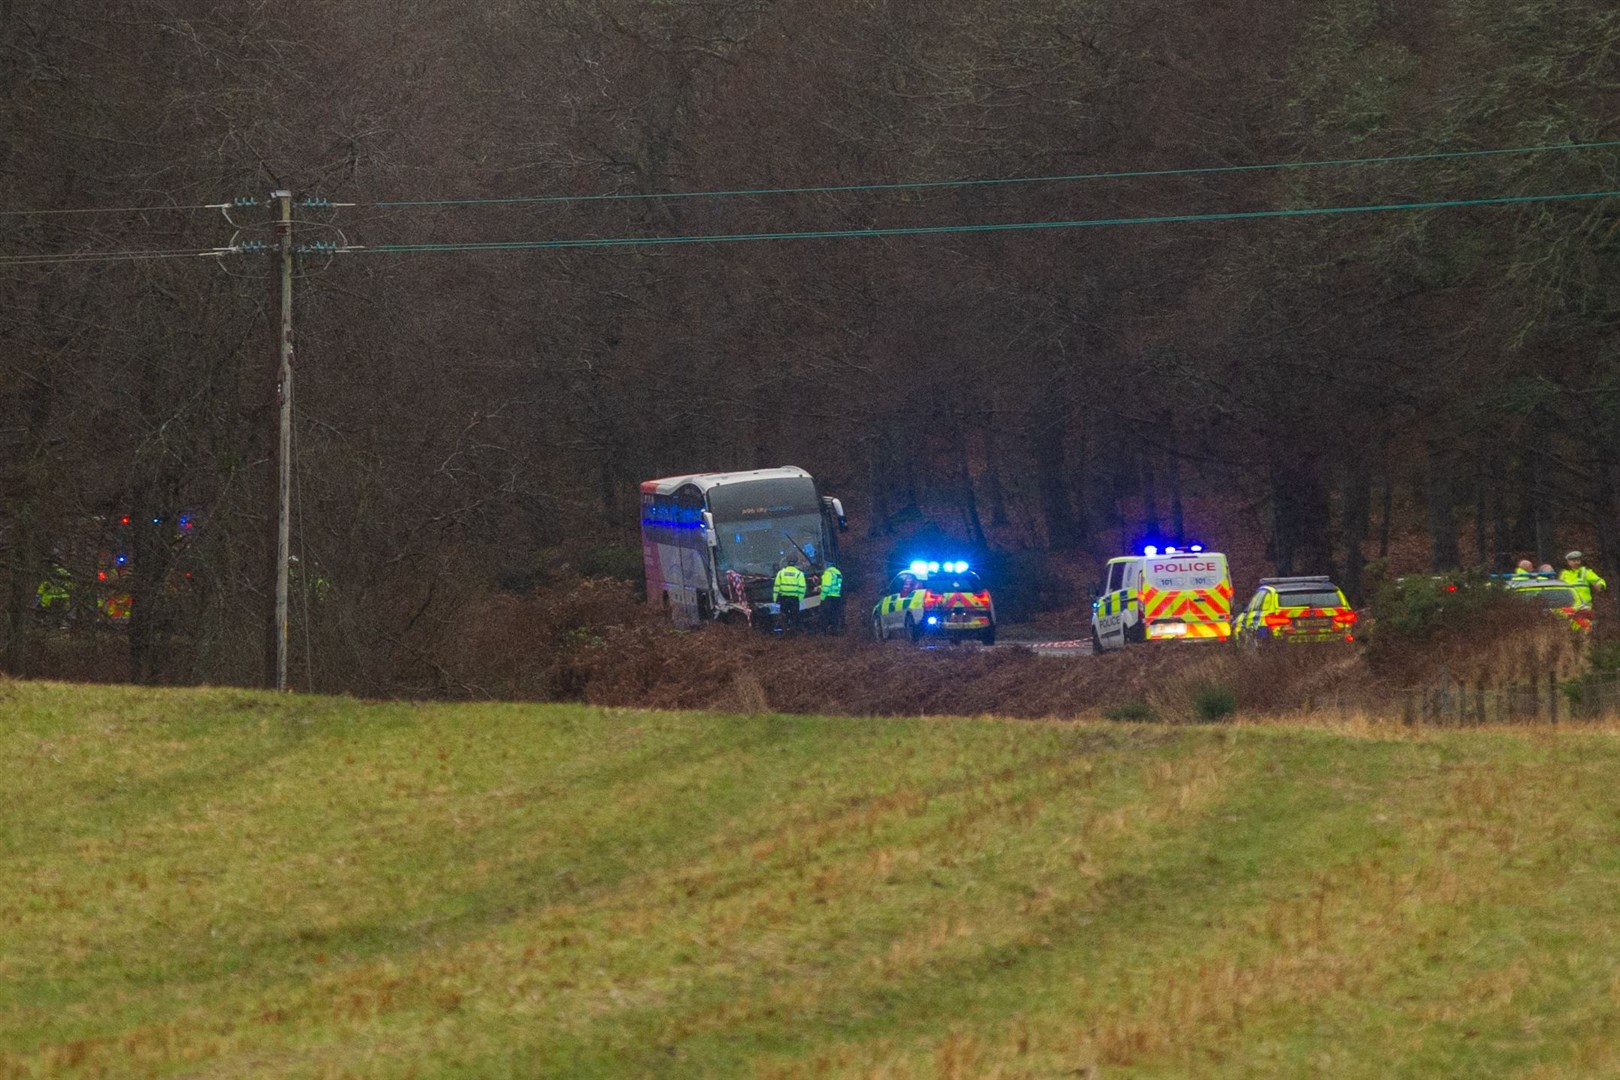 Emergency services at the scene of a bus crash on the A96 west of Elgin. Picture: Highland News & Media Photographer.